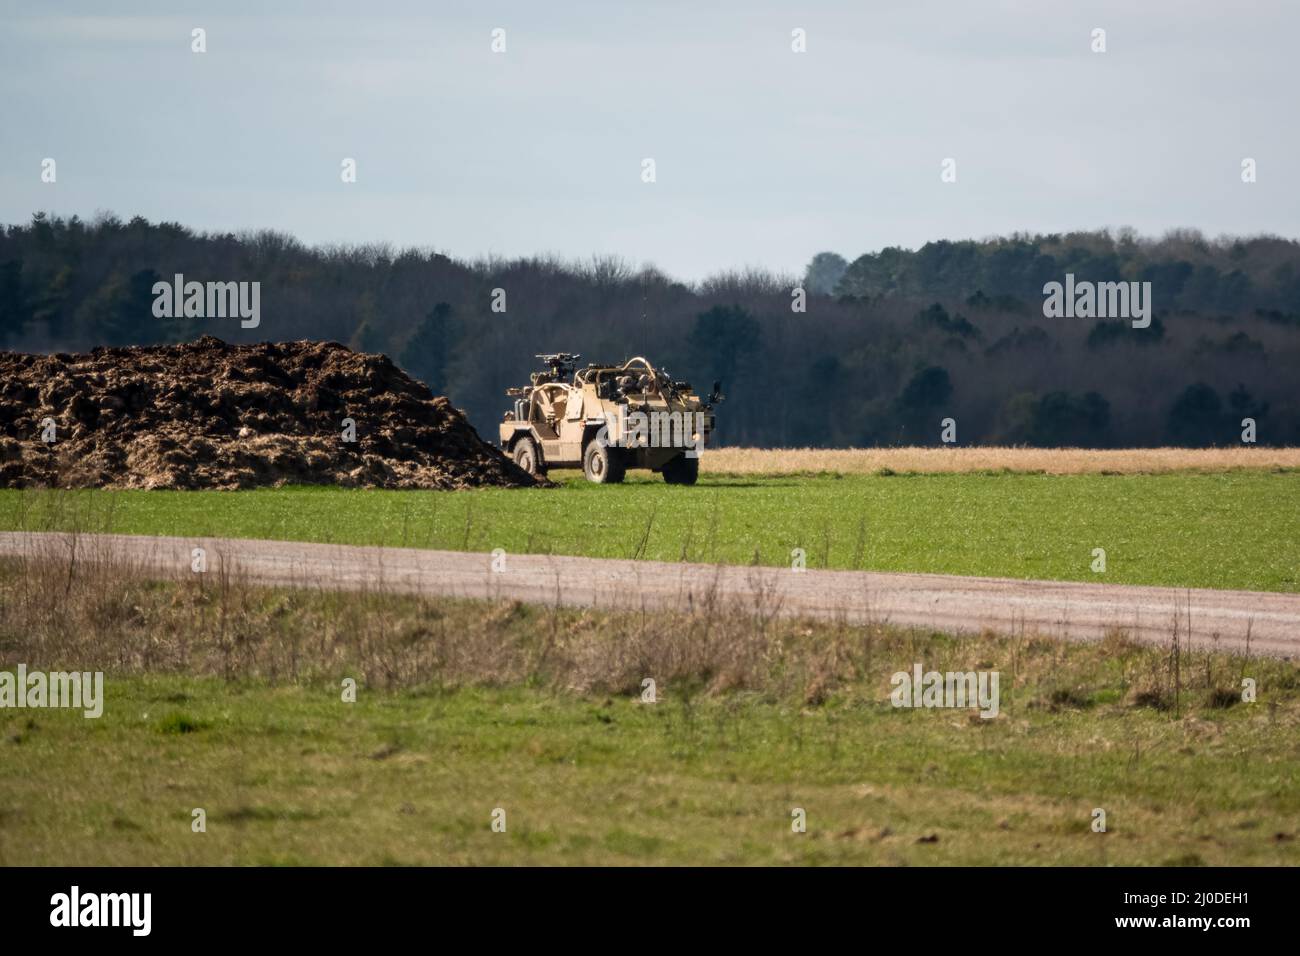 British army Supacat Jackal rapid assault, fire support and reconnaissance vehicle in action on a military training battle exercise, blue sky cloud Stock Photo